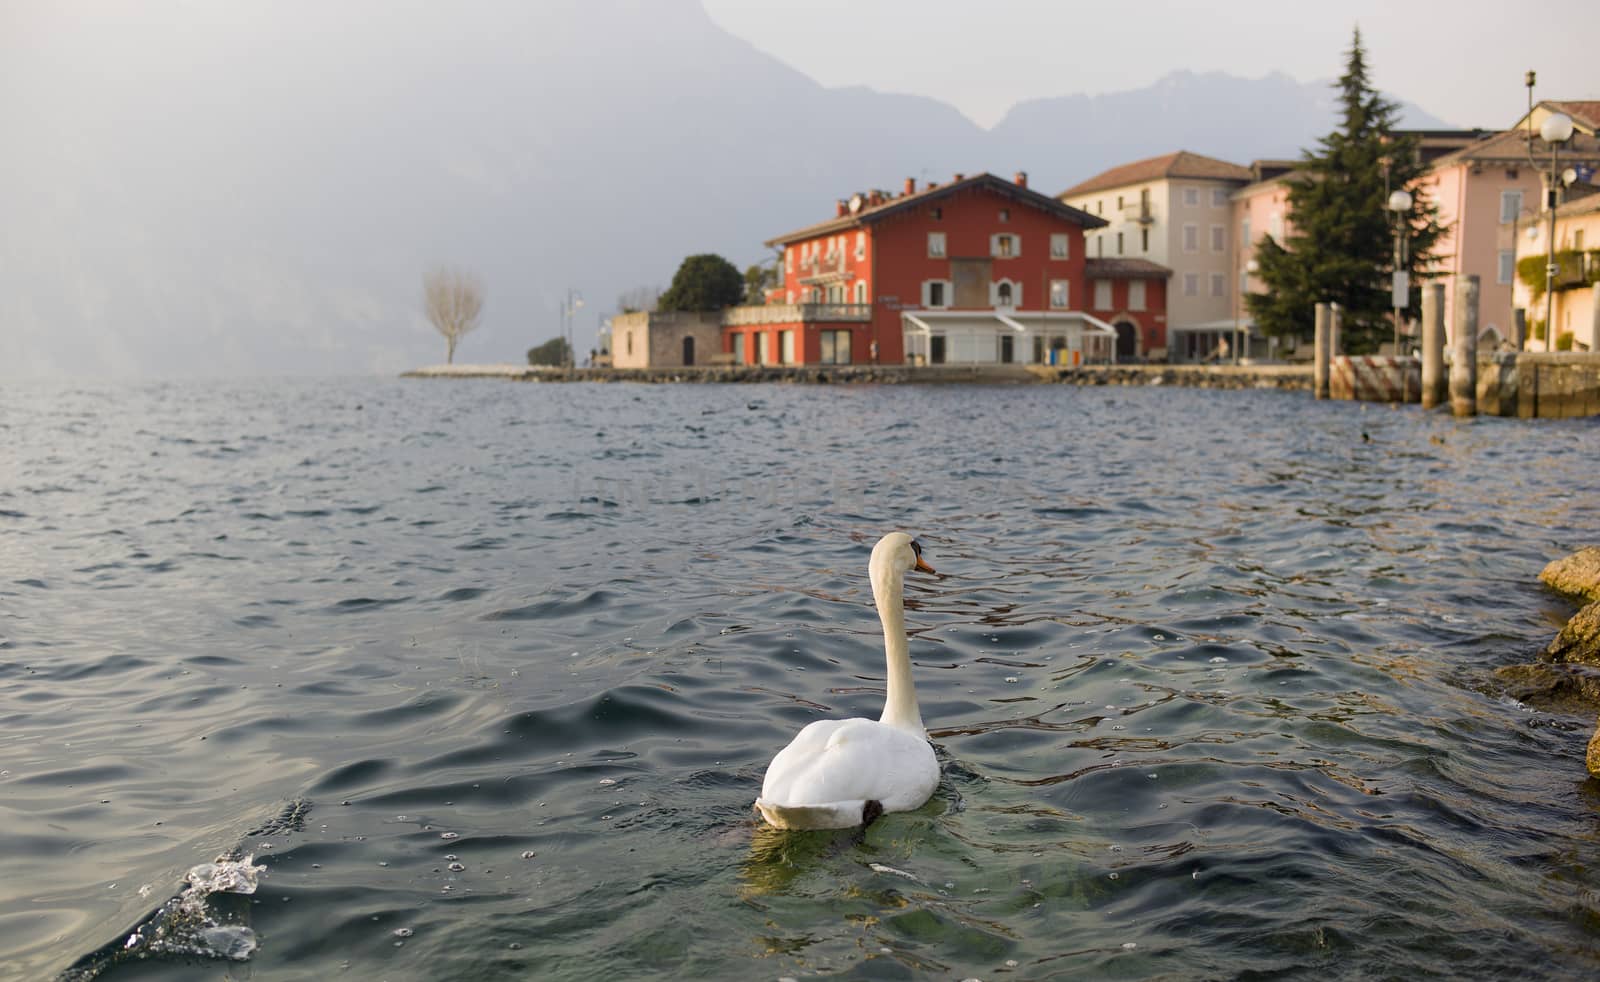 A swan seeing the world in the lake Garda, northern Italy. With small Italian town and mountains in the background.